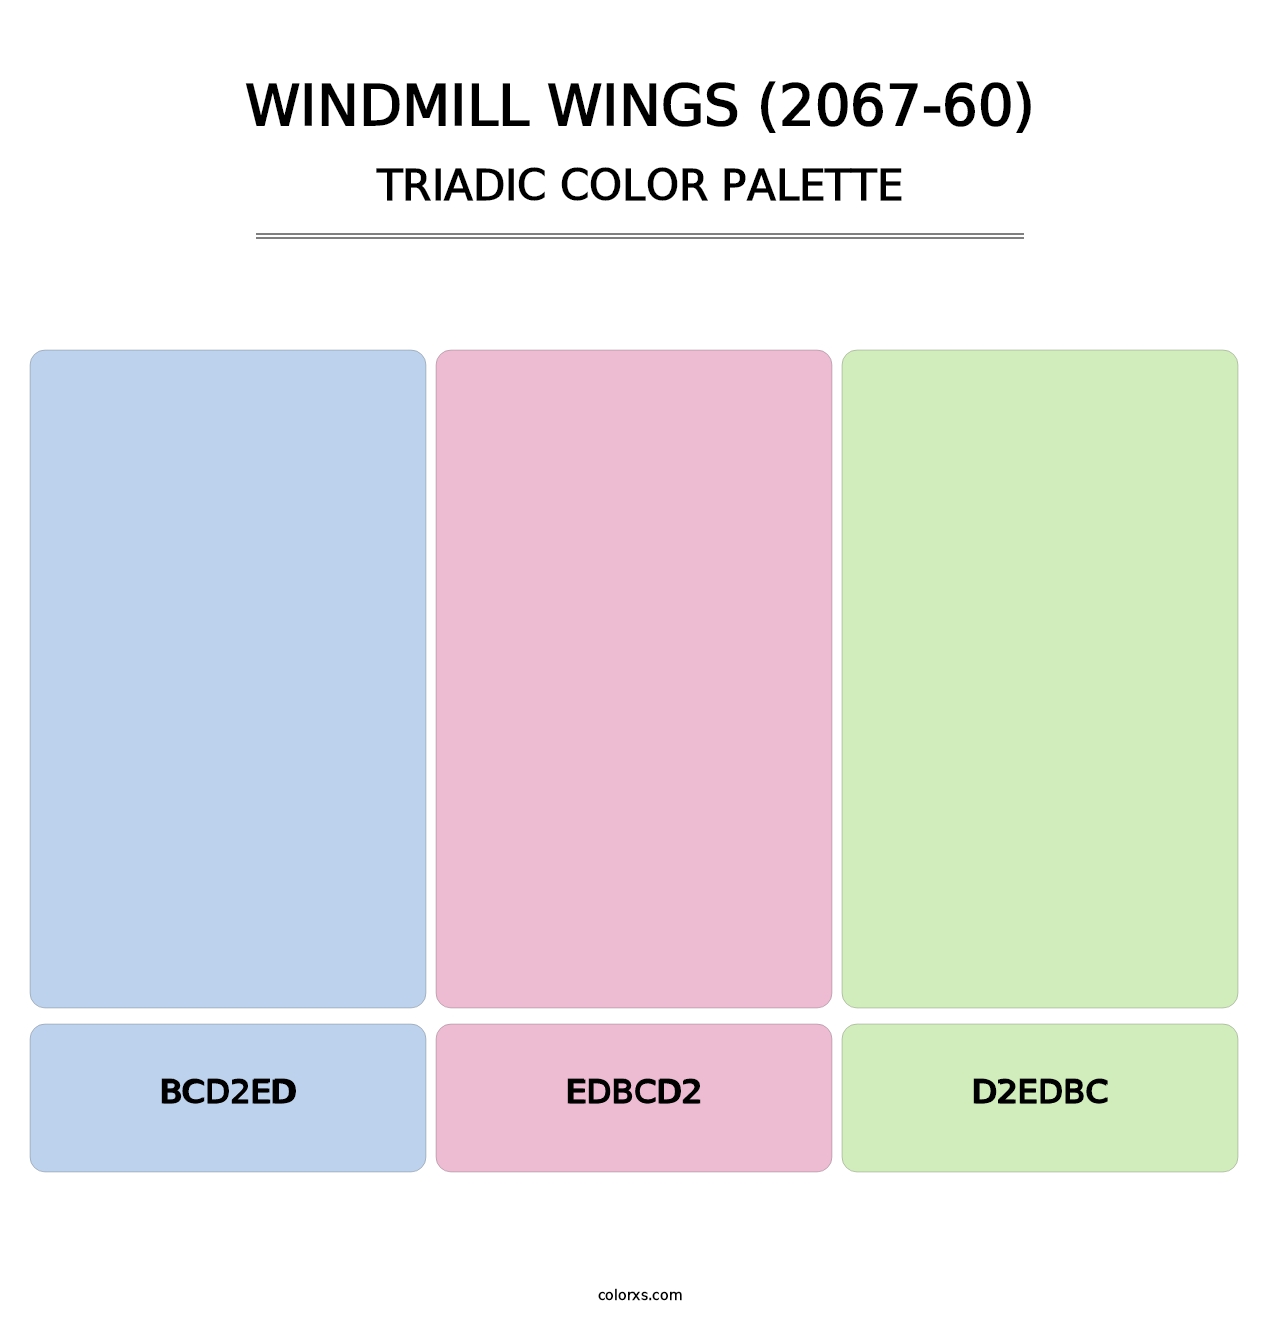 Windmill Wings (2067-60) - Triadic Color Palette